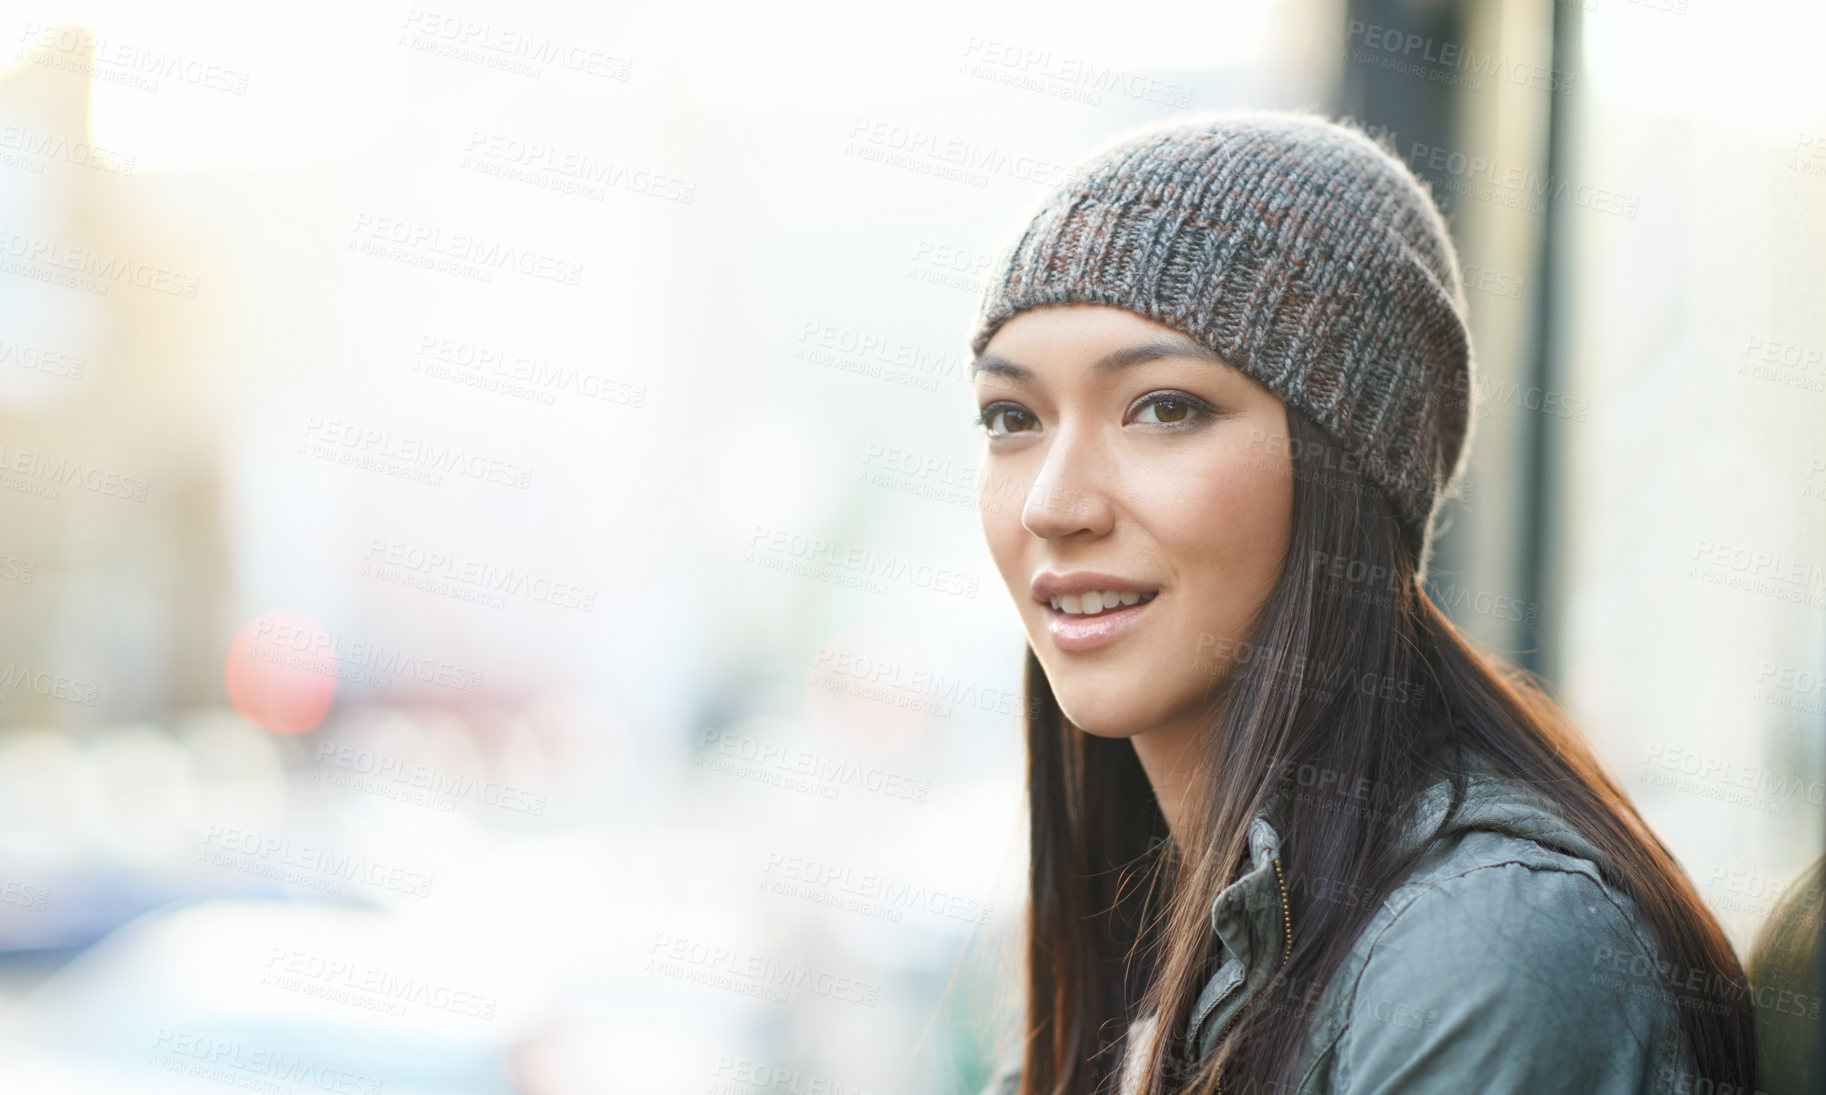 Buy stock photo Thinking, city and ideas with woman, cold and choice with peace and morning with winter weather. Person, outdoor and girl with a beanie, New York or wool cap with happiness and urban town in a street